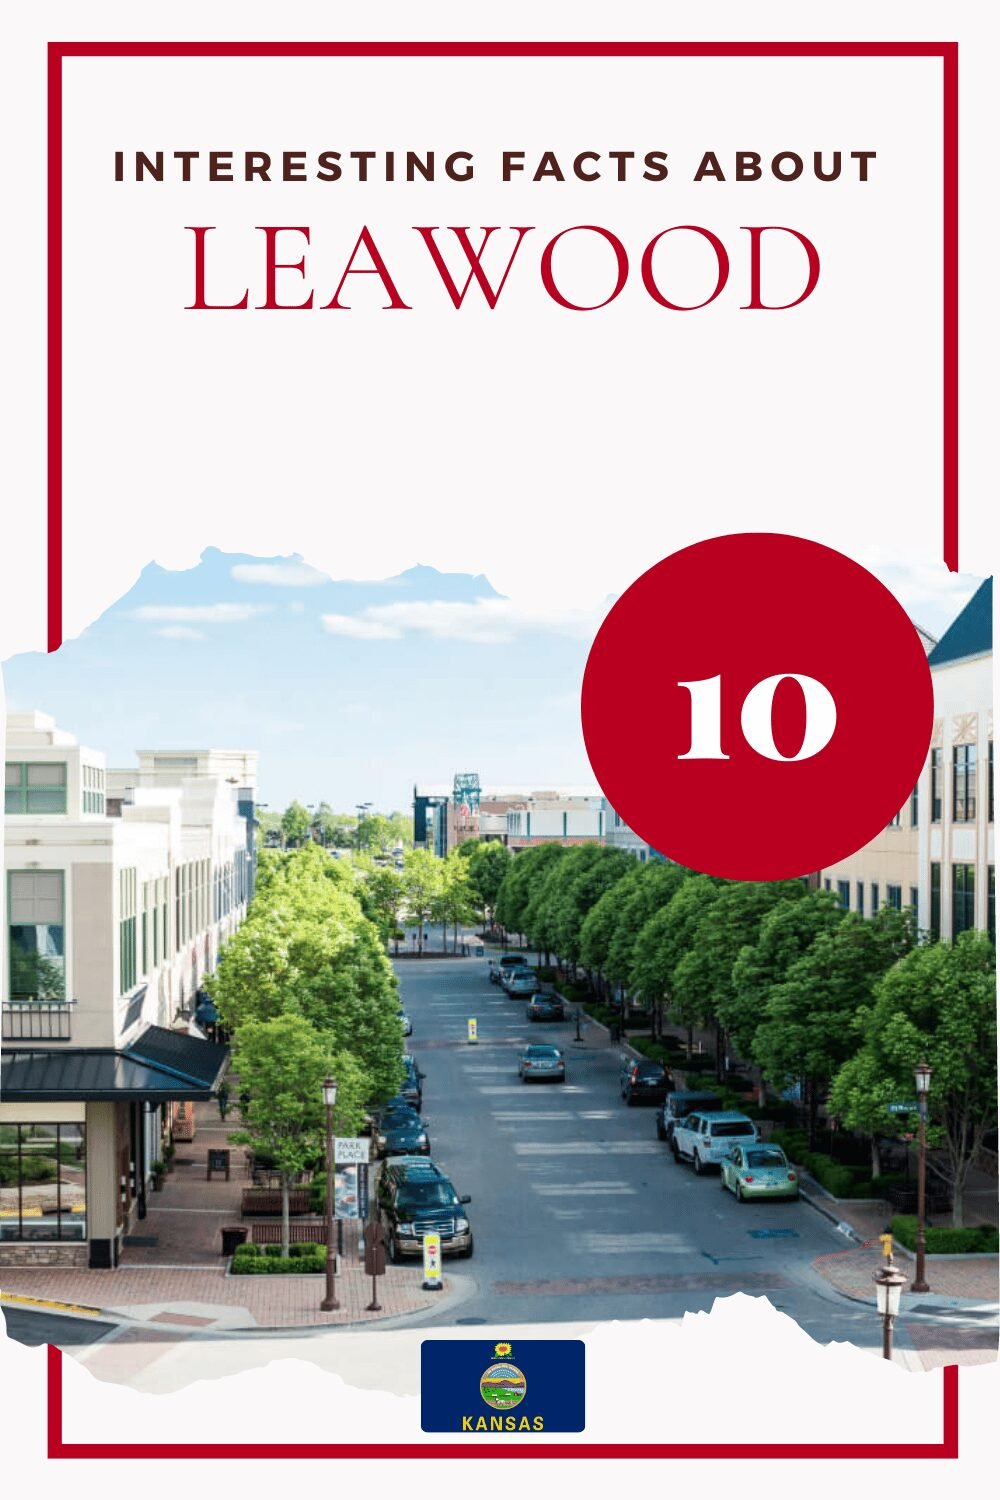 Facts About Leawood, Kansas